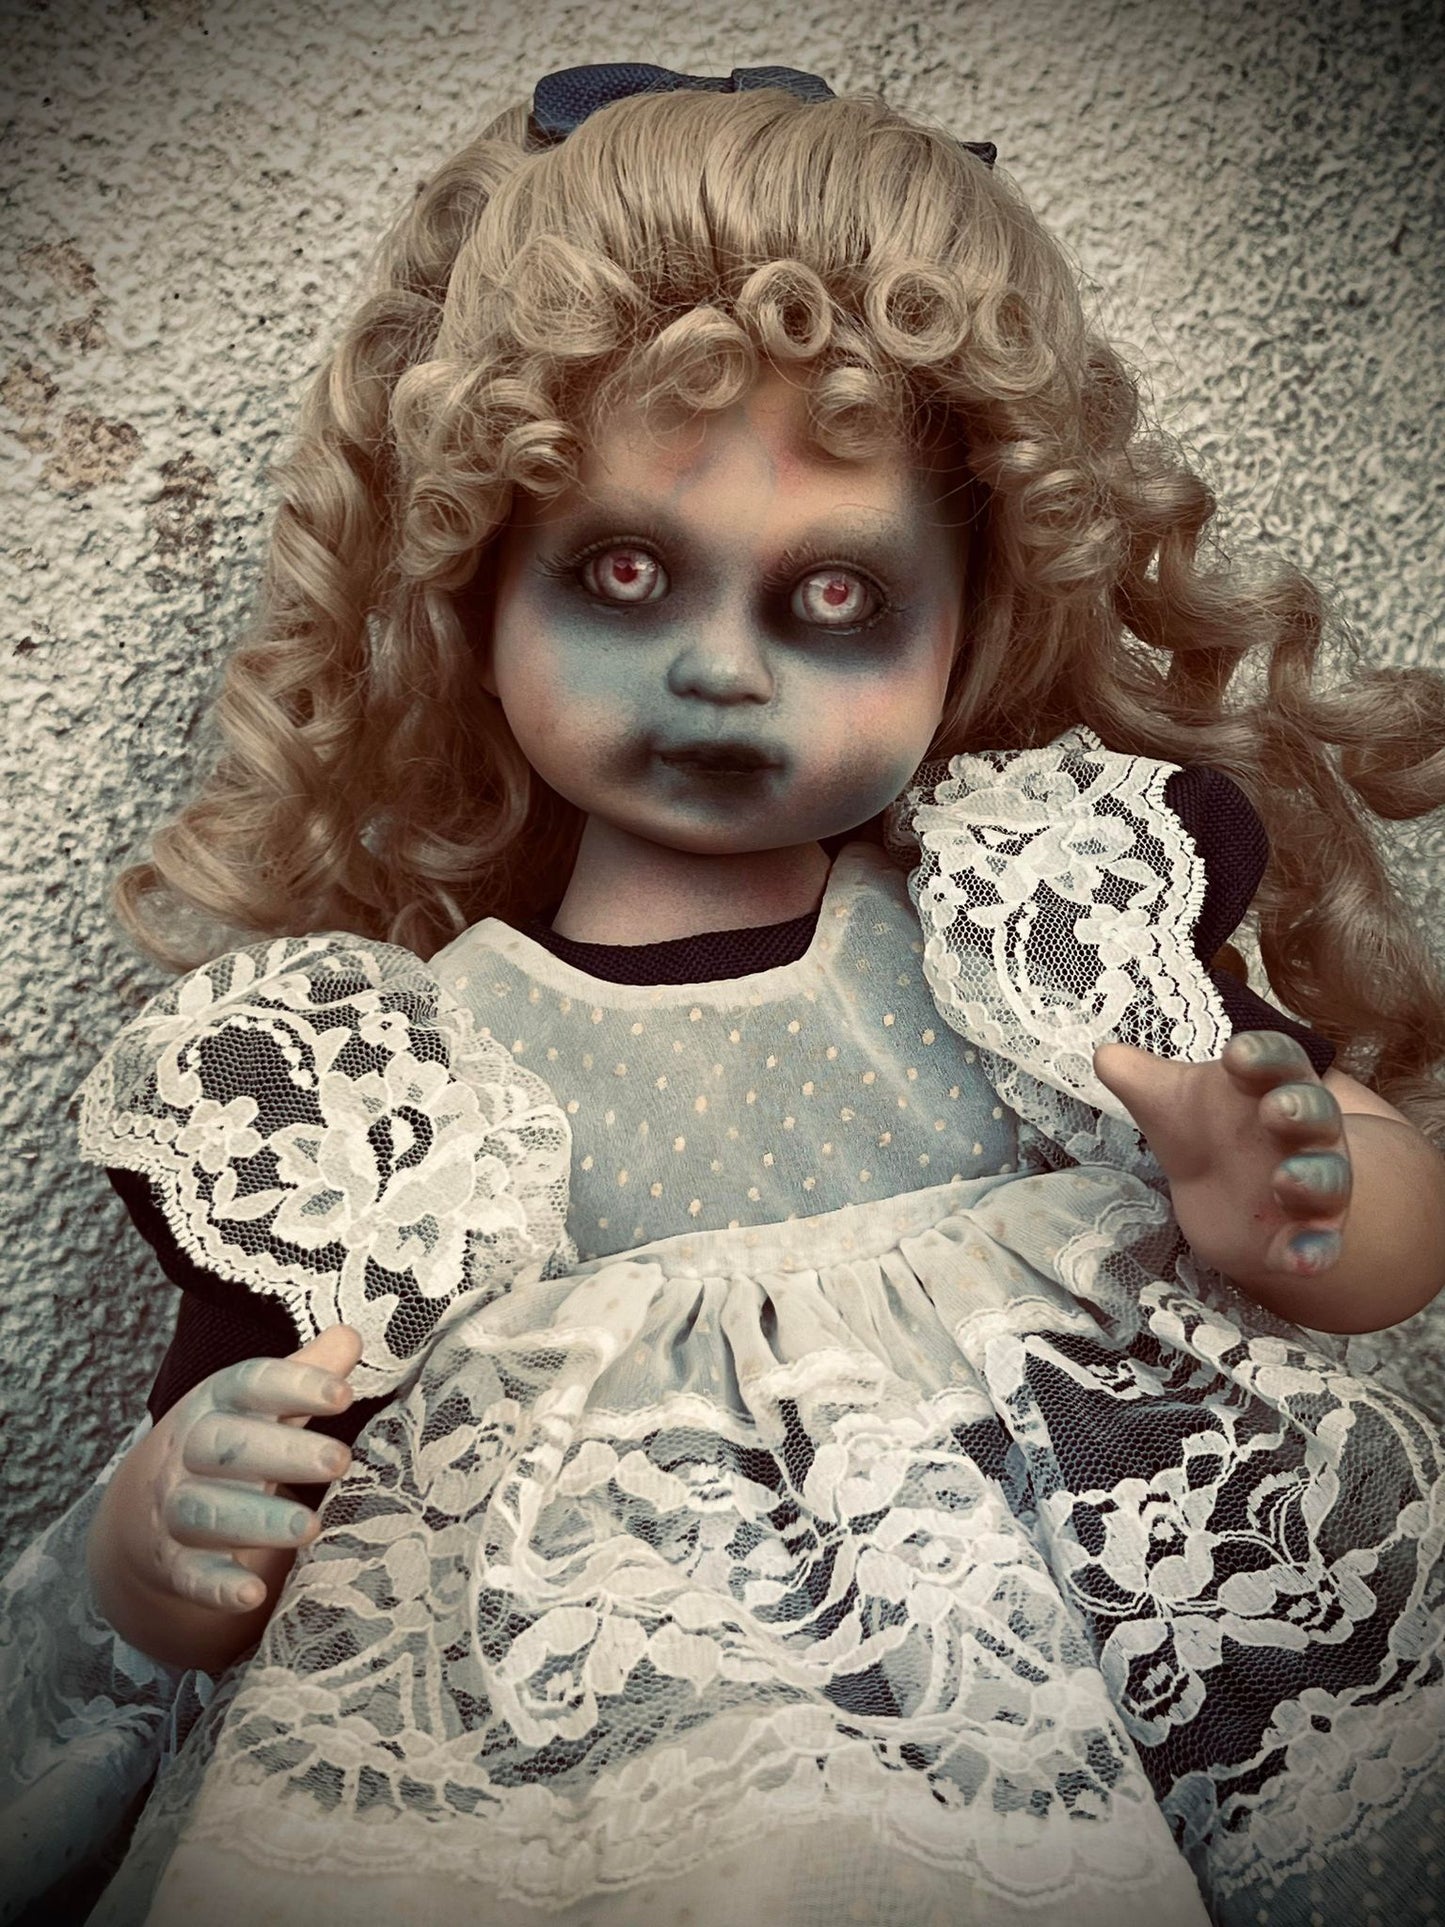 Meet Lily 18" Doll Porcelain Zombie Undead Witchy Creepy Haunted Spirit Infected Scary Spooky Possessed Positive Oddity Gift Idea